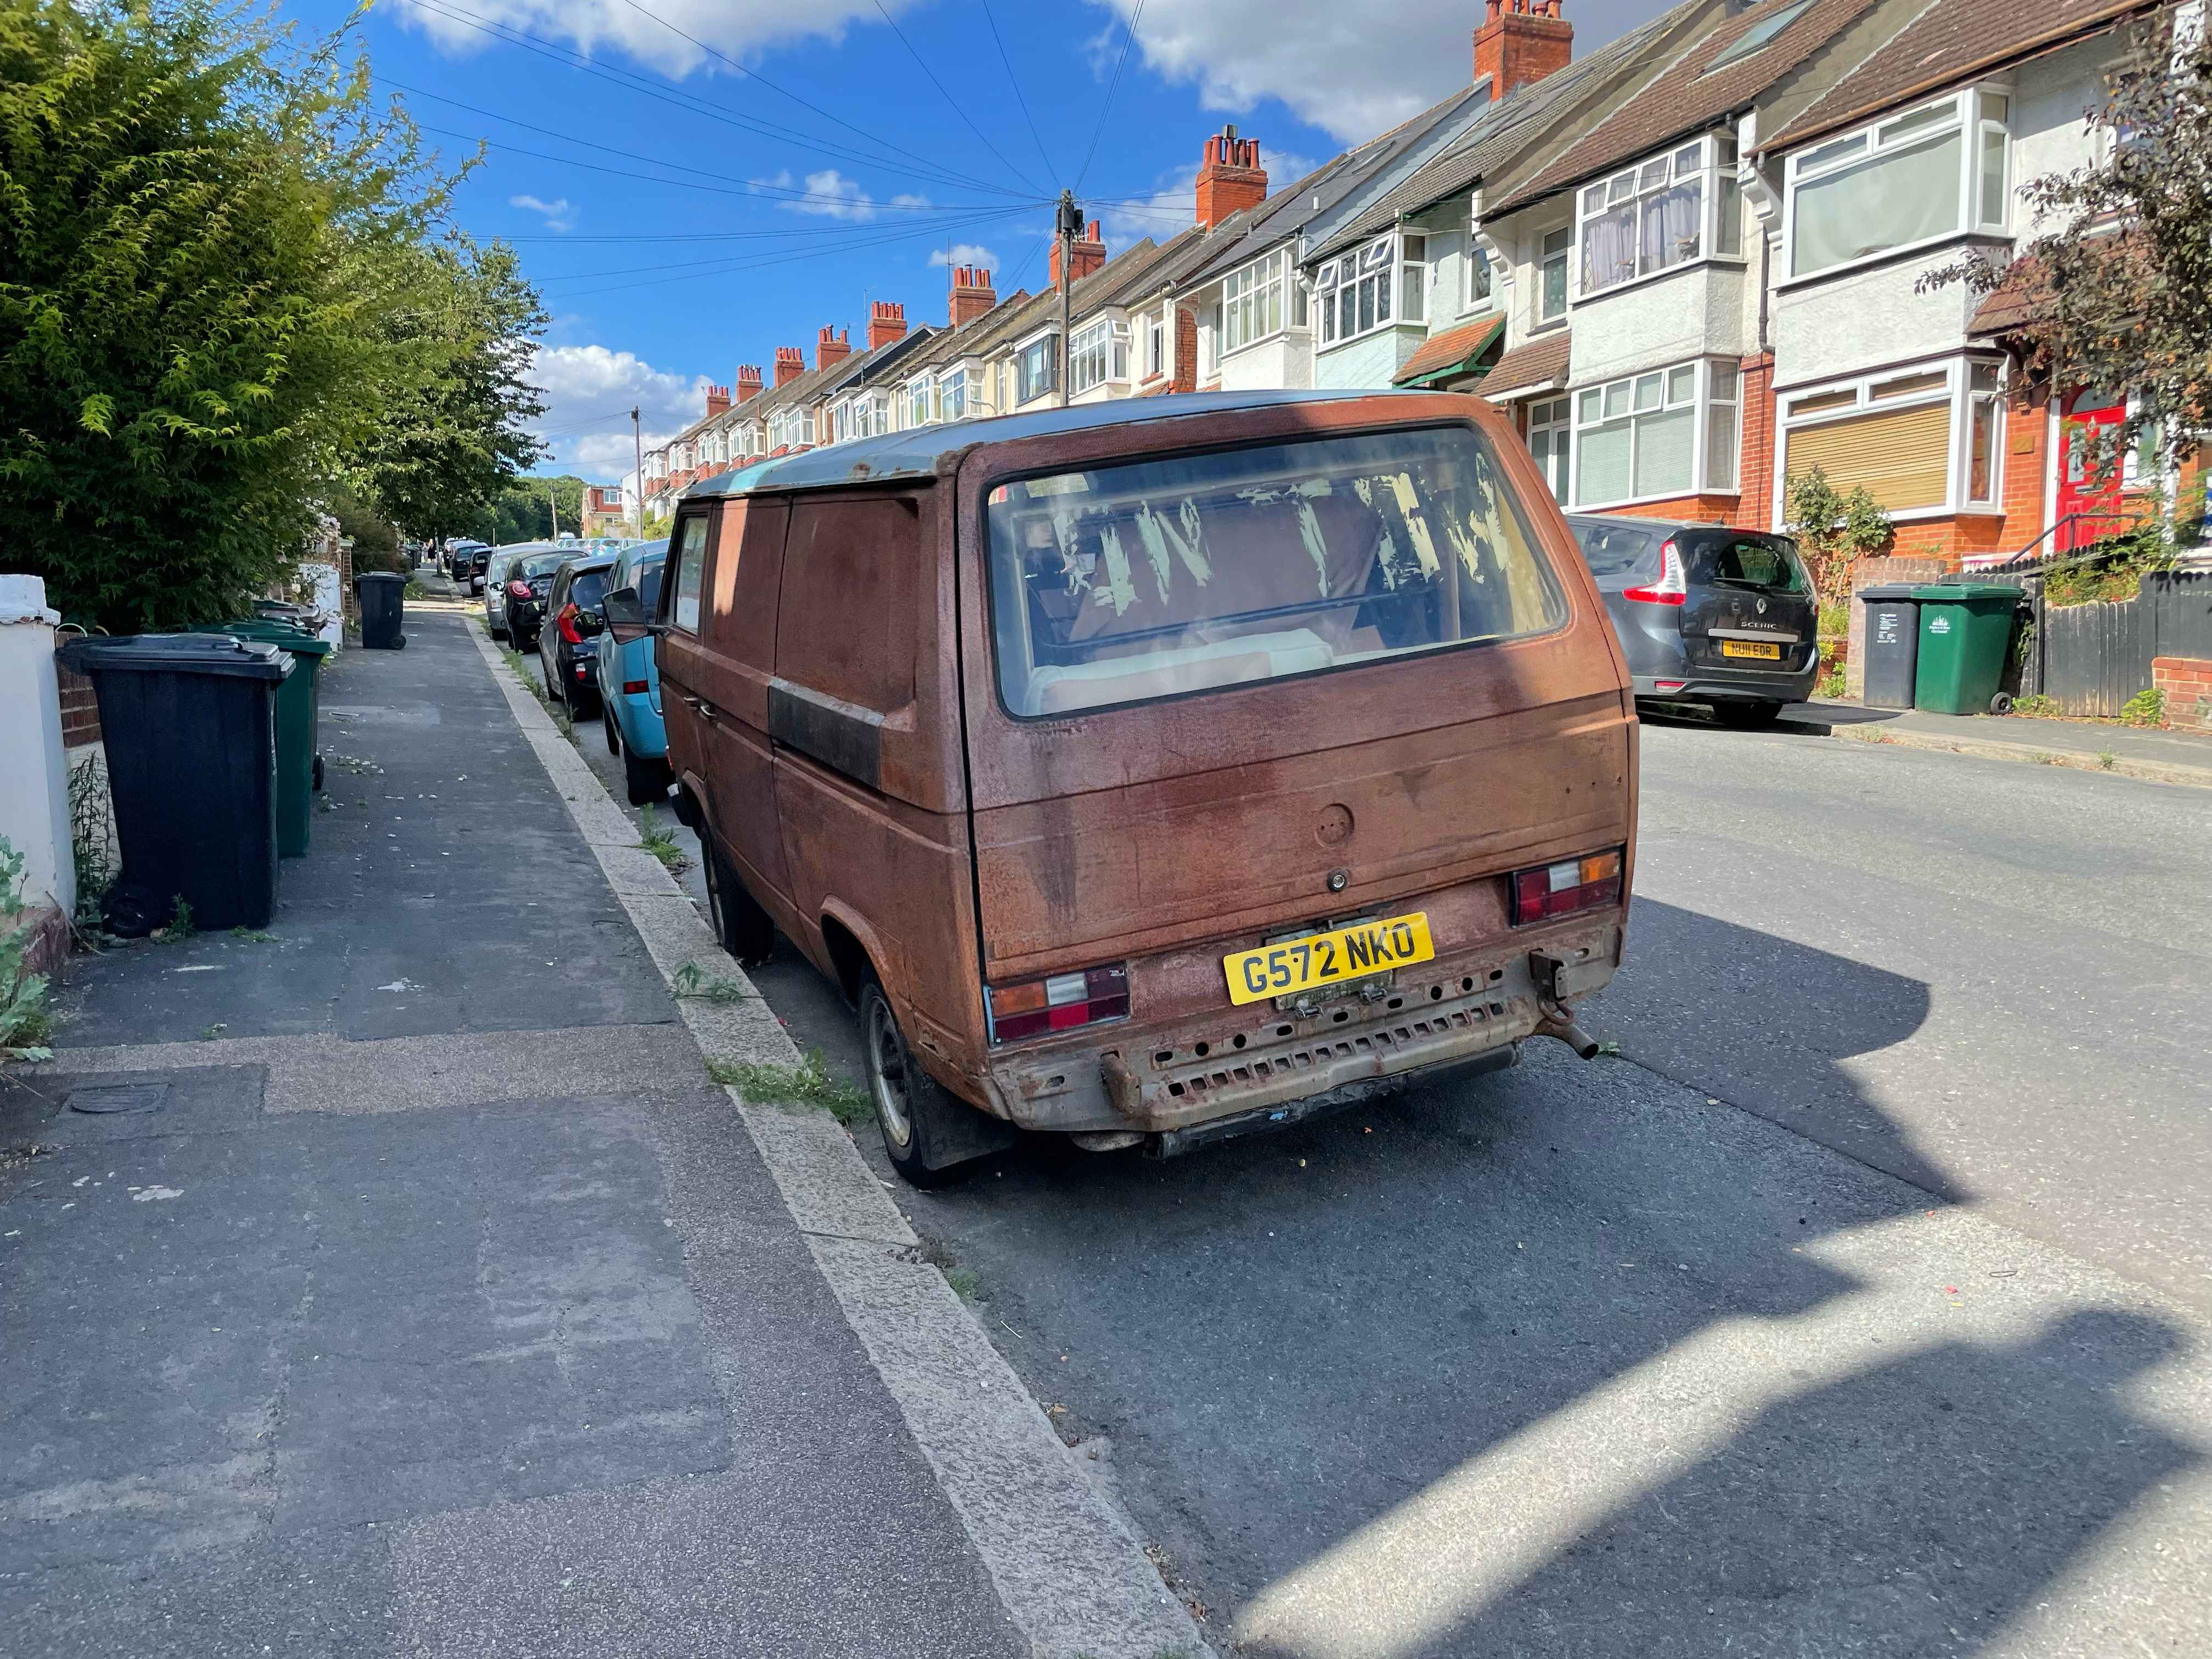 Photograph of G572 NKO - a Rusty Volkswagen Transporter camper van parked in Hollingdean by a non-resident. The second of two photographs supplied by the residents of Hollingdean.